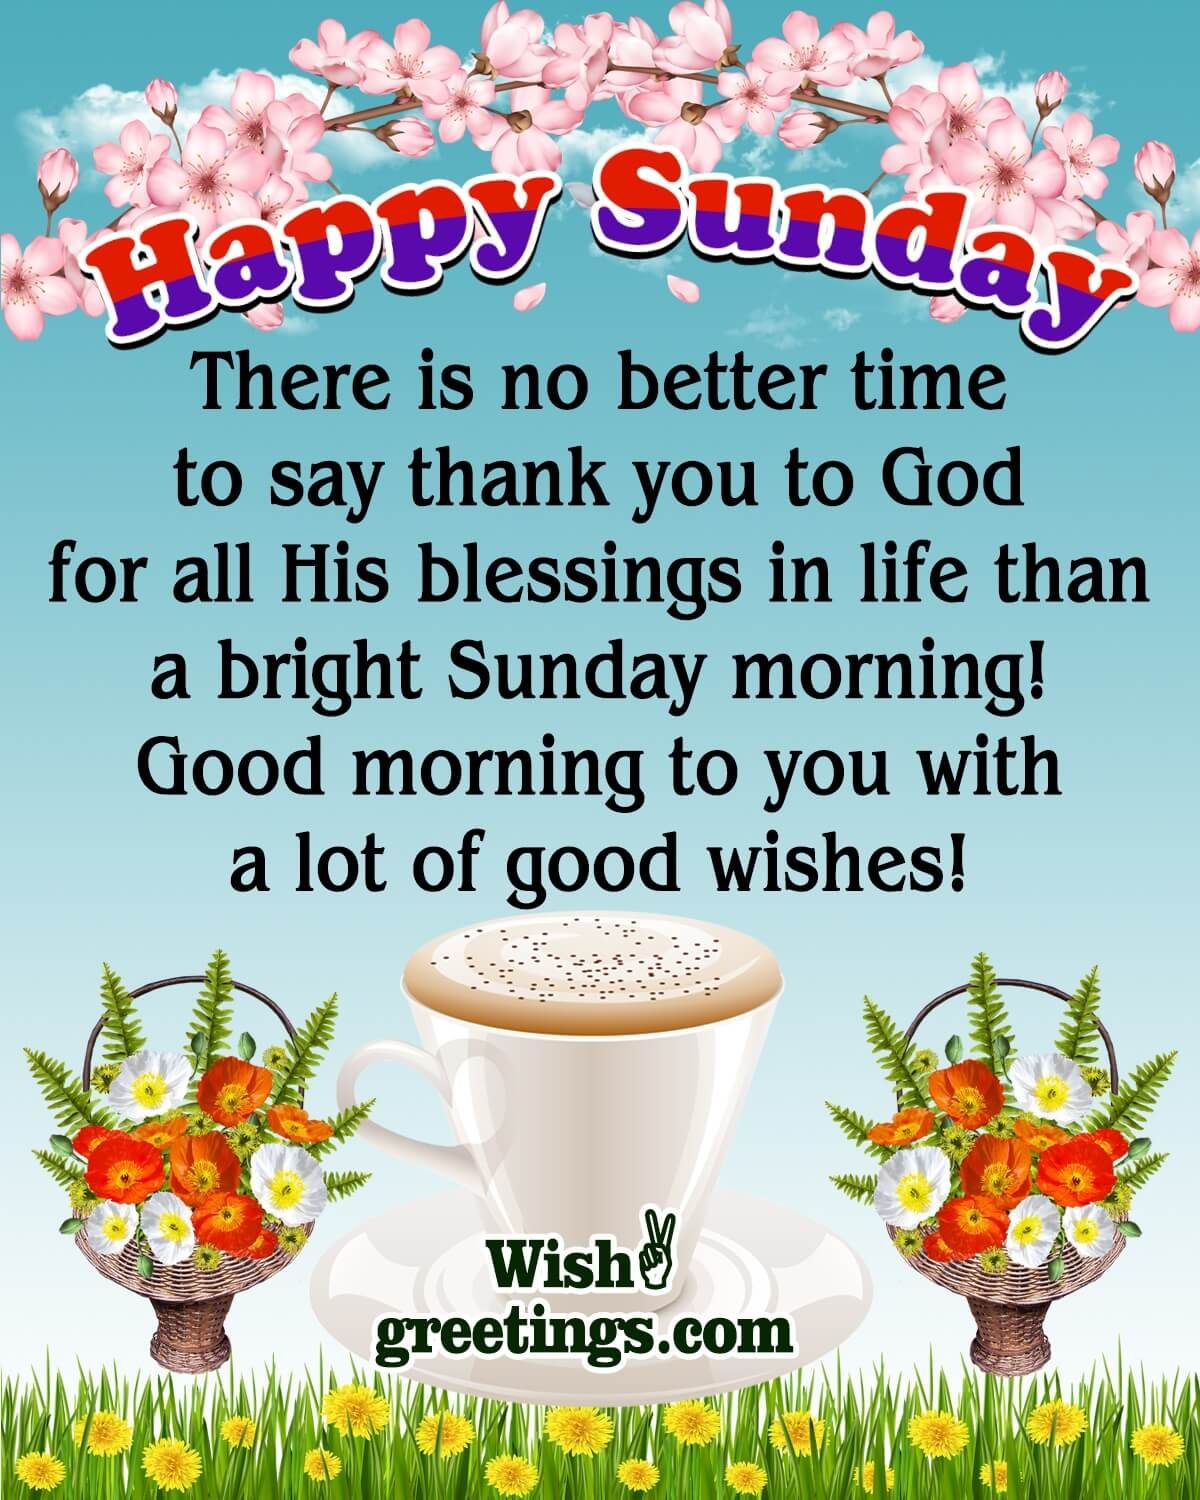 Astonishing Compilation Of 4k Full Sunday Good Morning Images With Quotes Over 999 Flawless